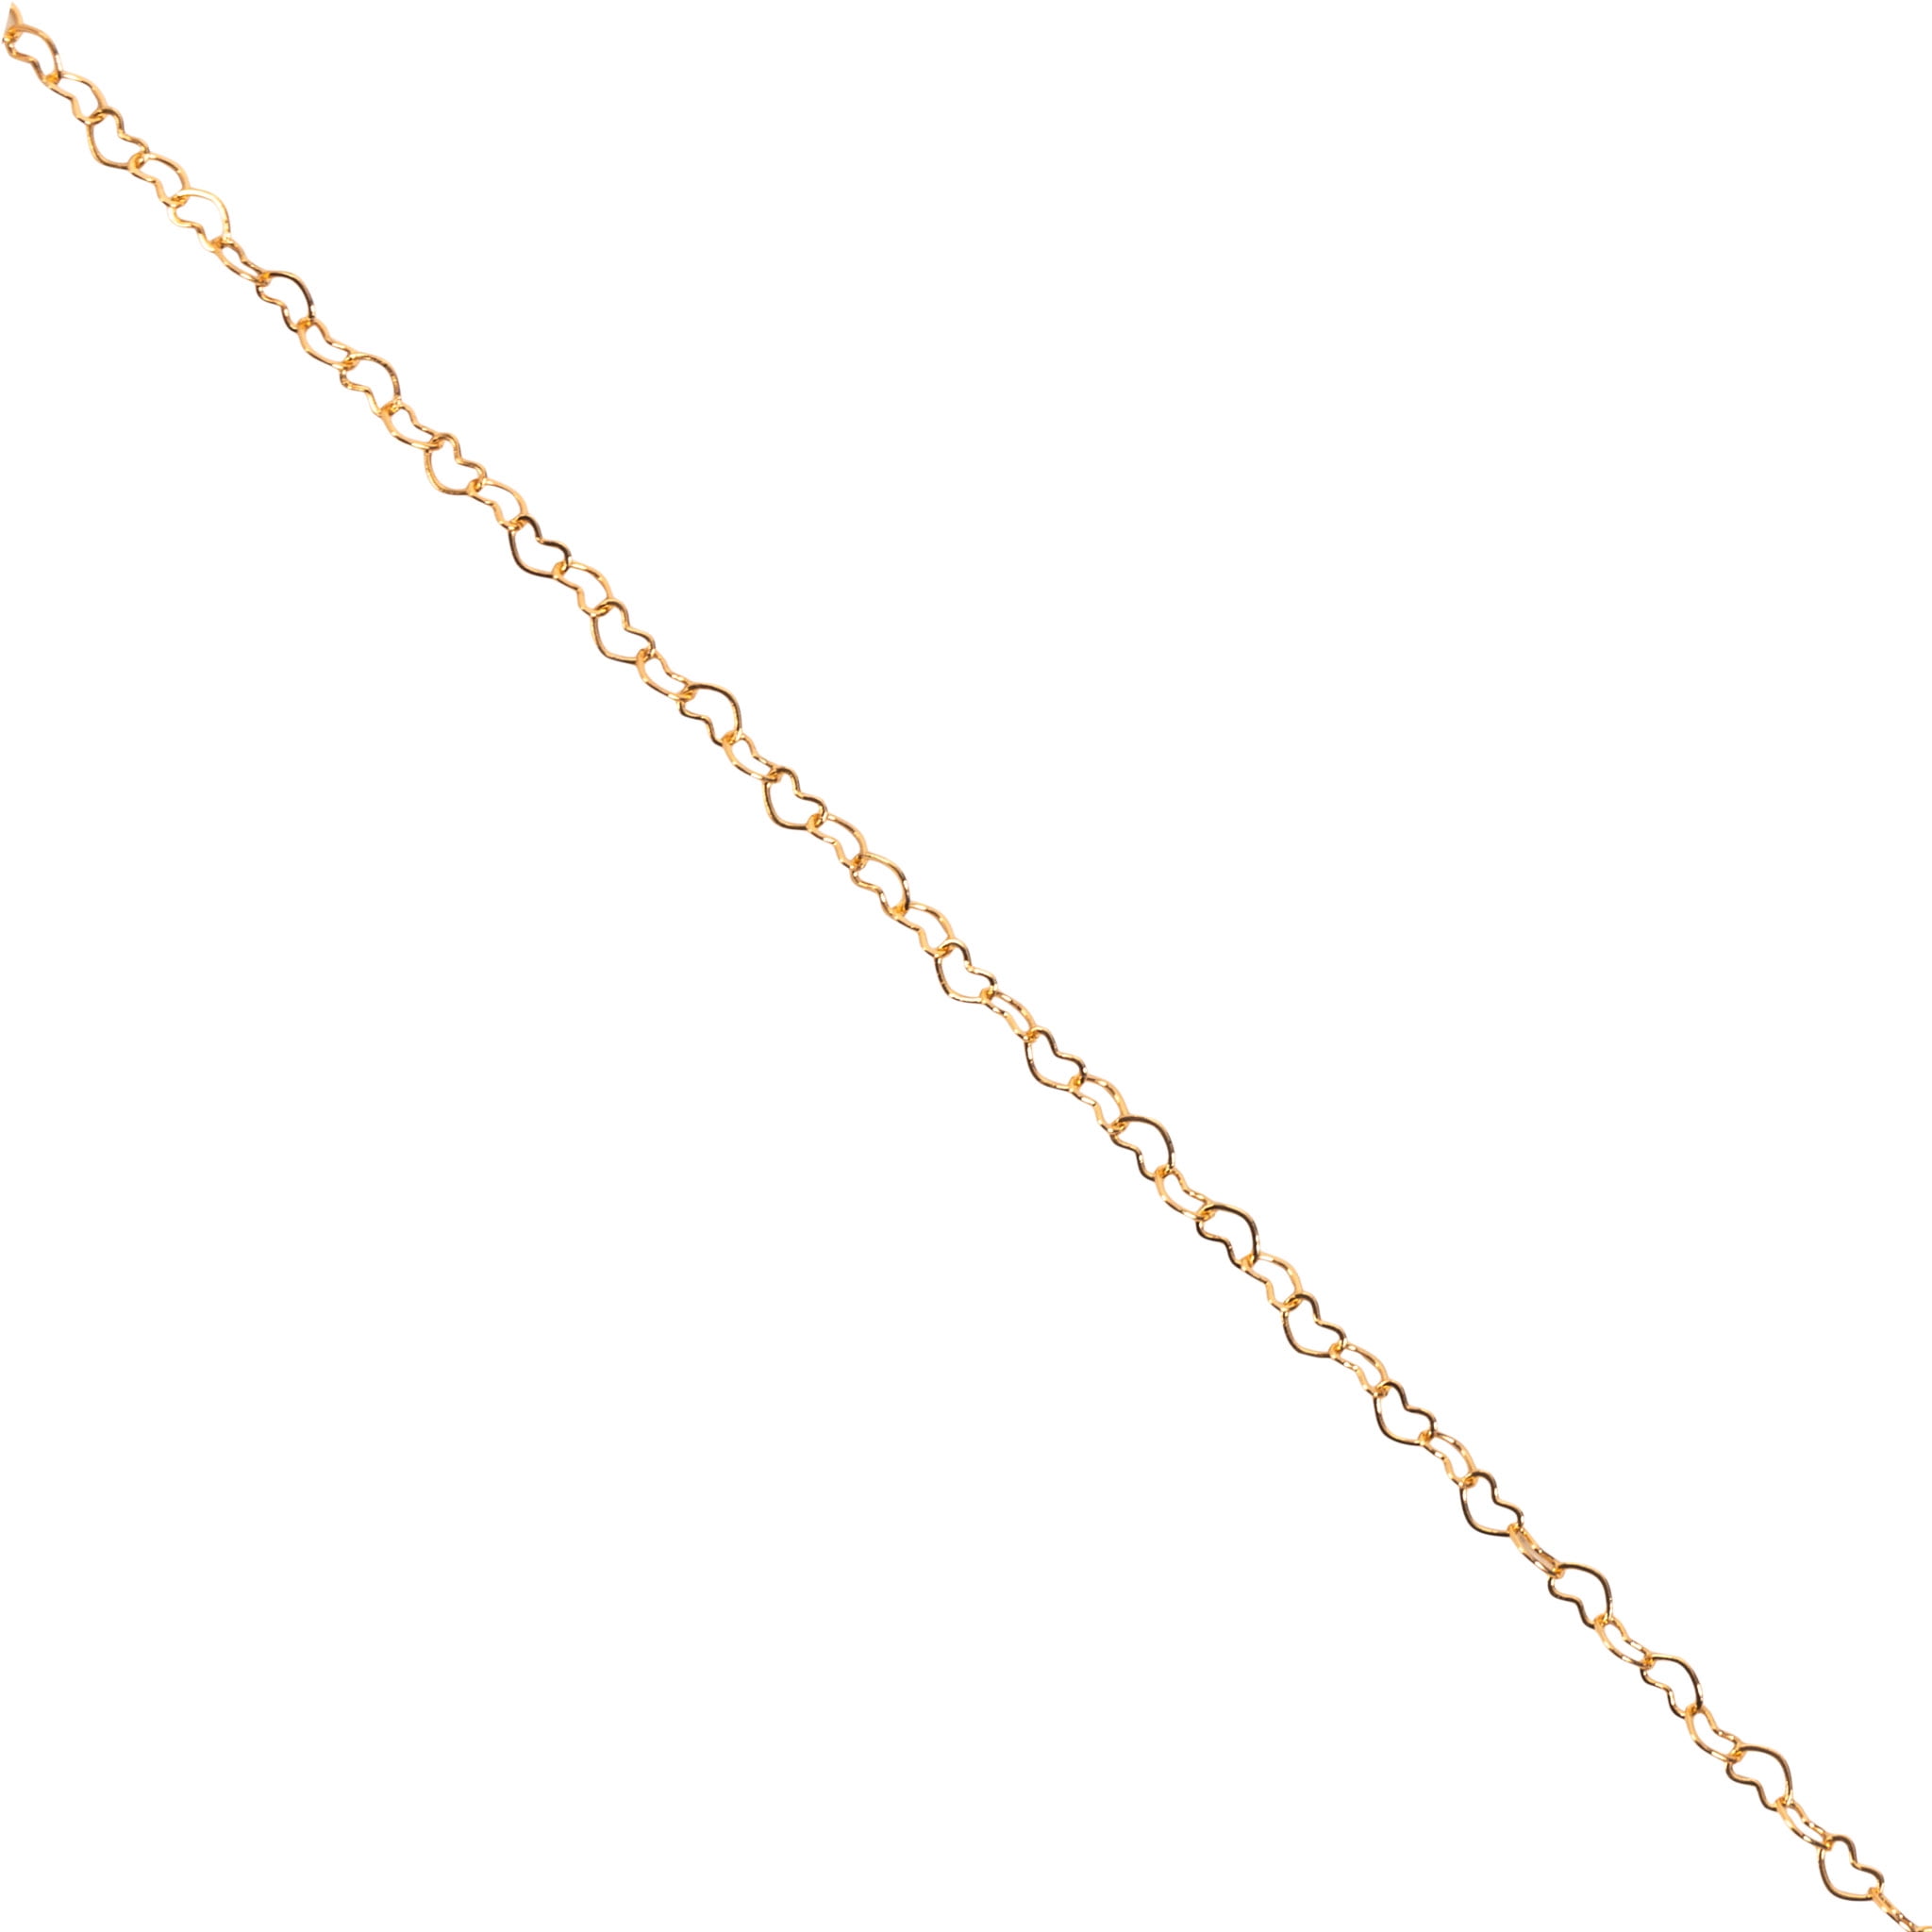 Howard's Layer Me 18 Gold Heart Necklace Chain for Women 